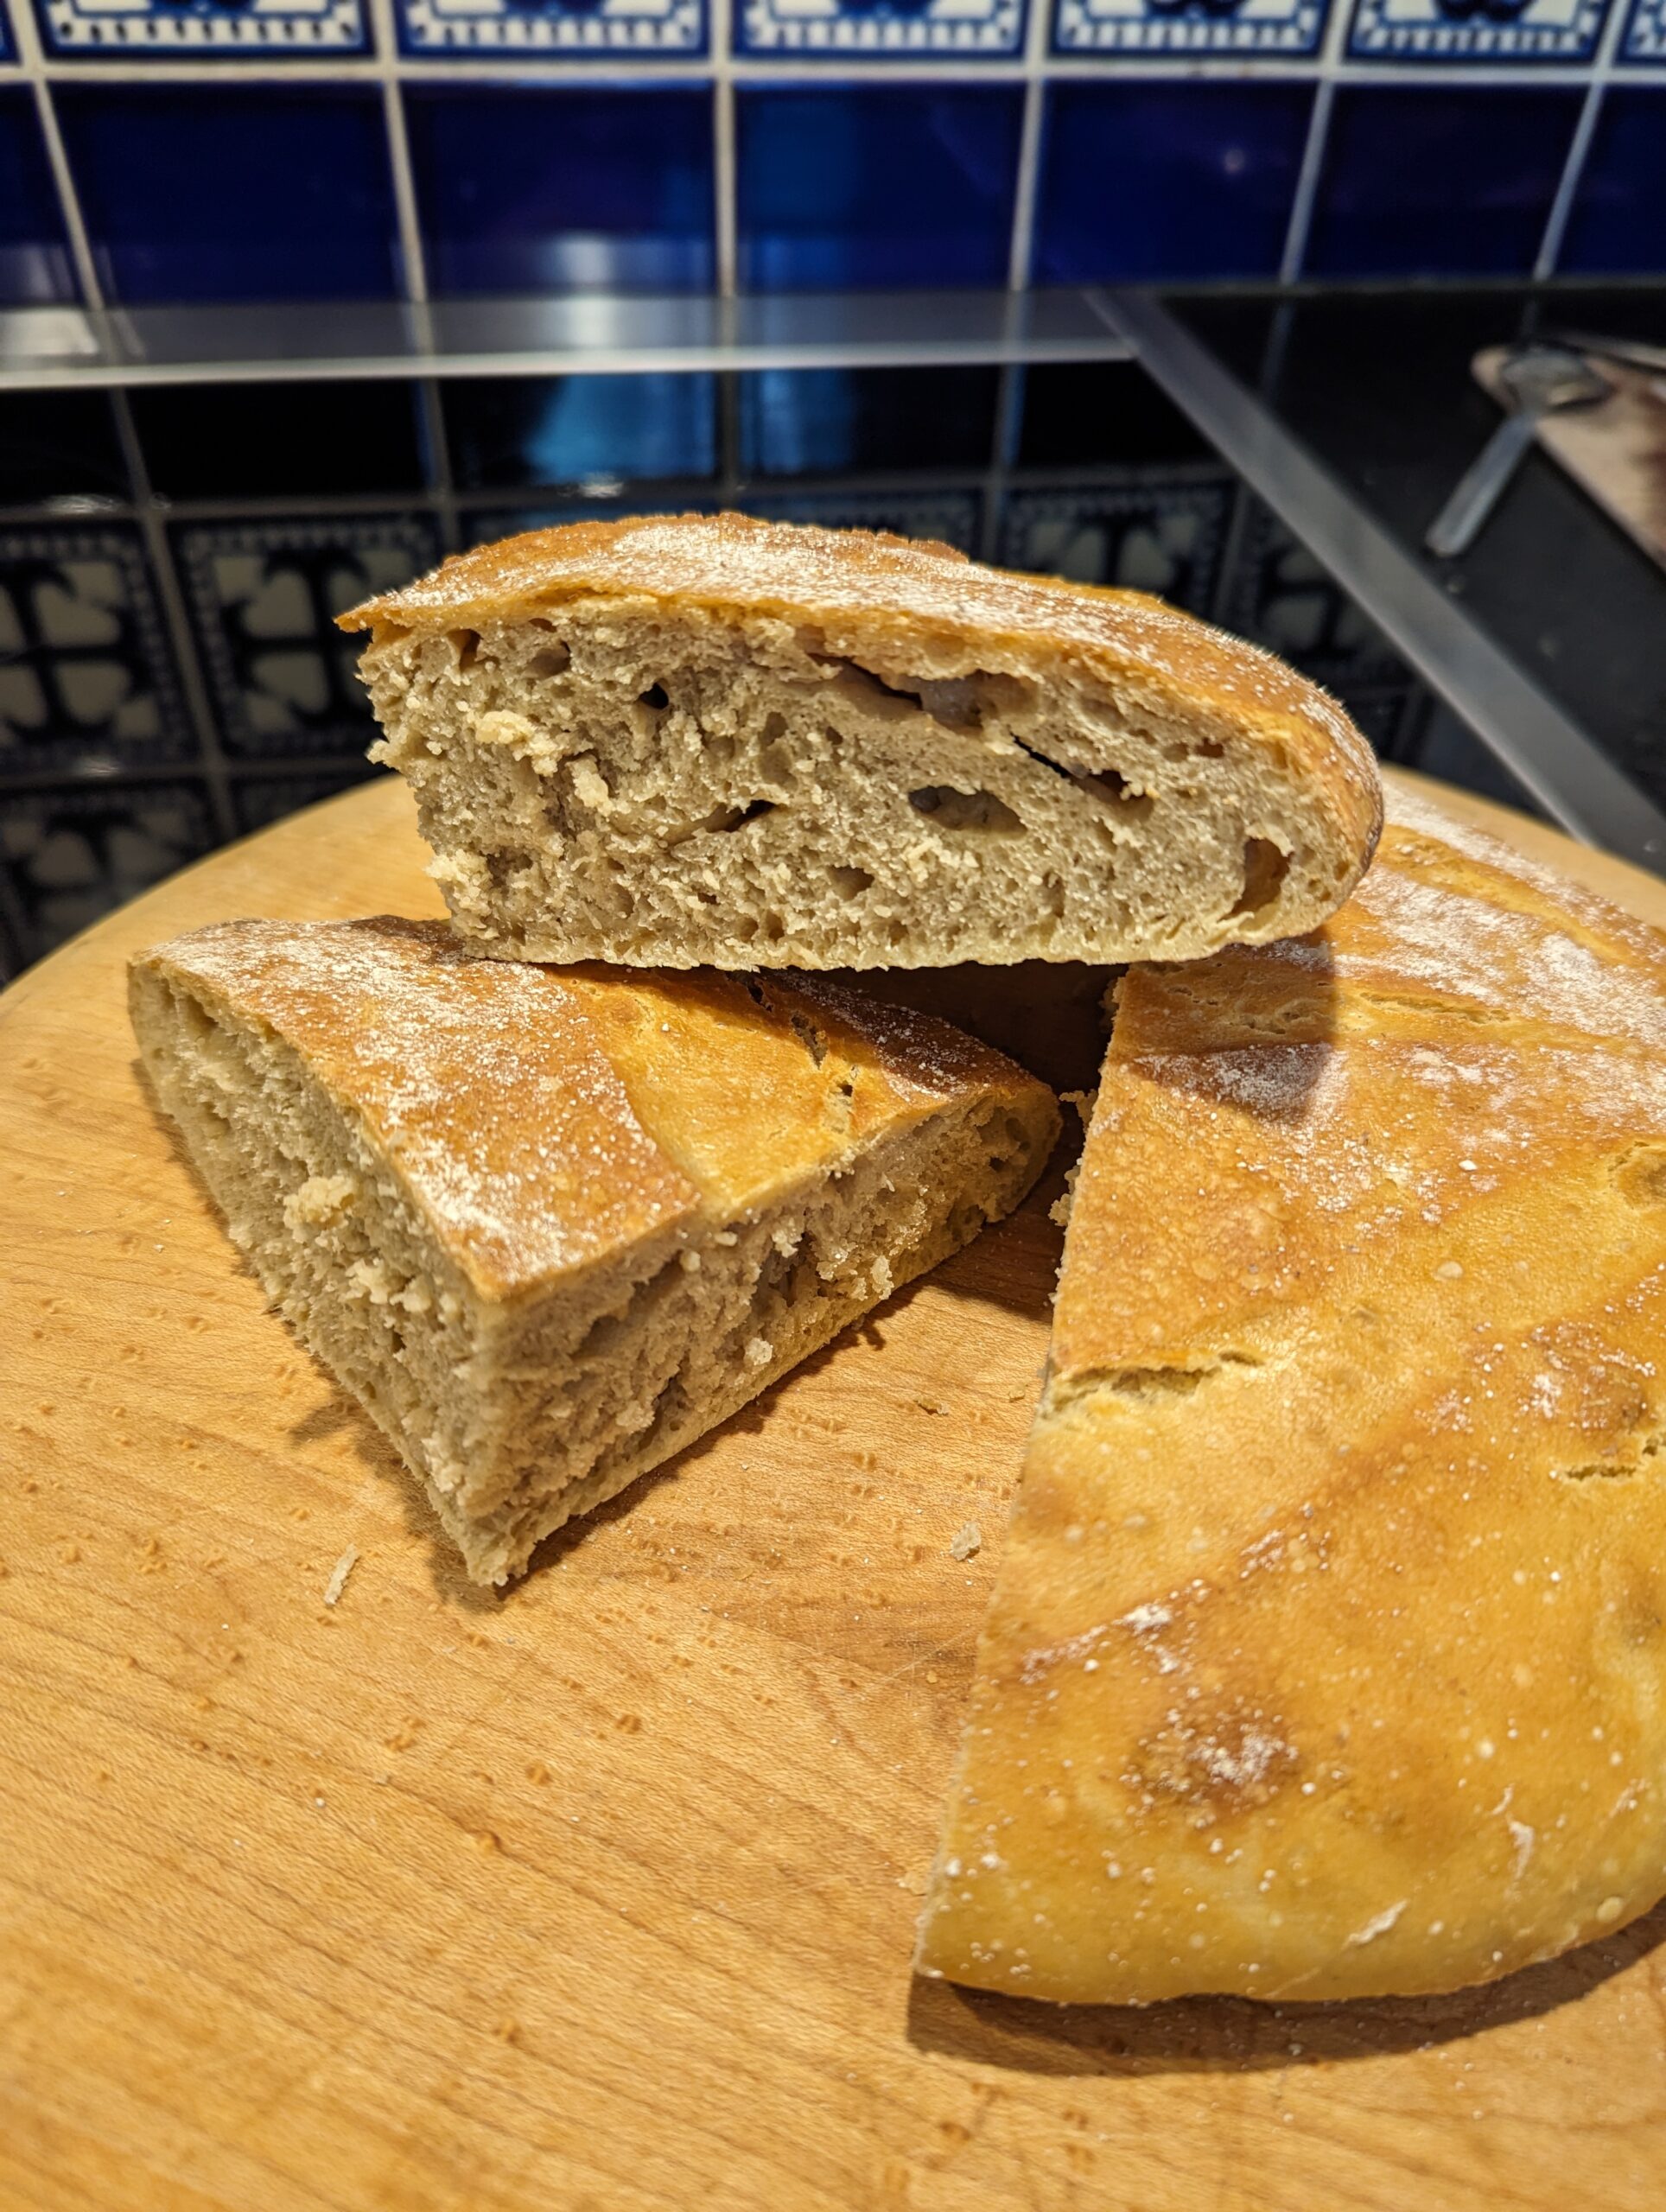 Pullman Loaf - Artisan Bread in Five Minutes a Day